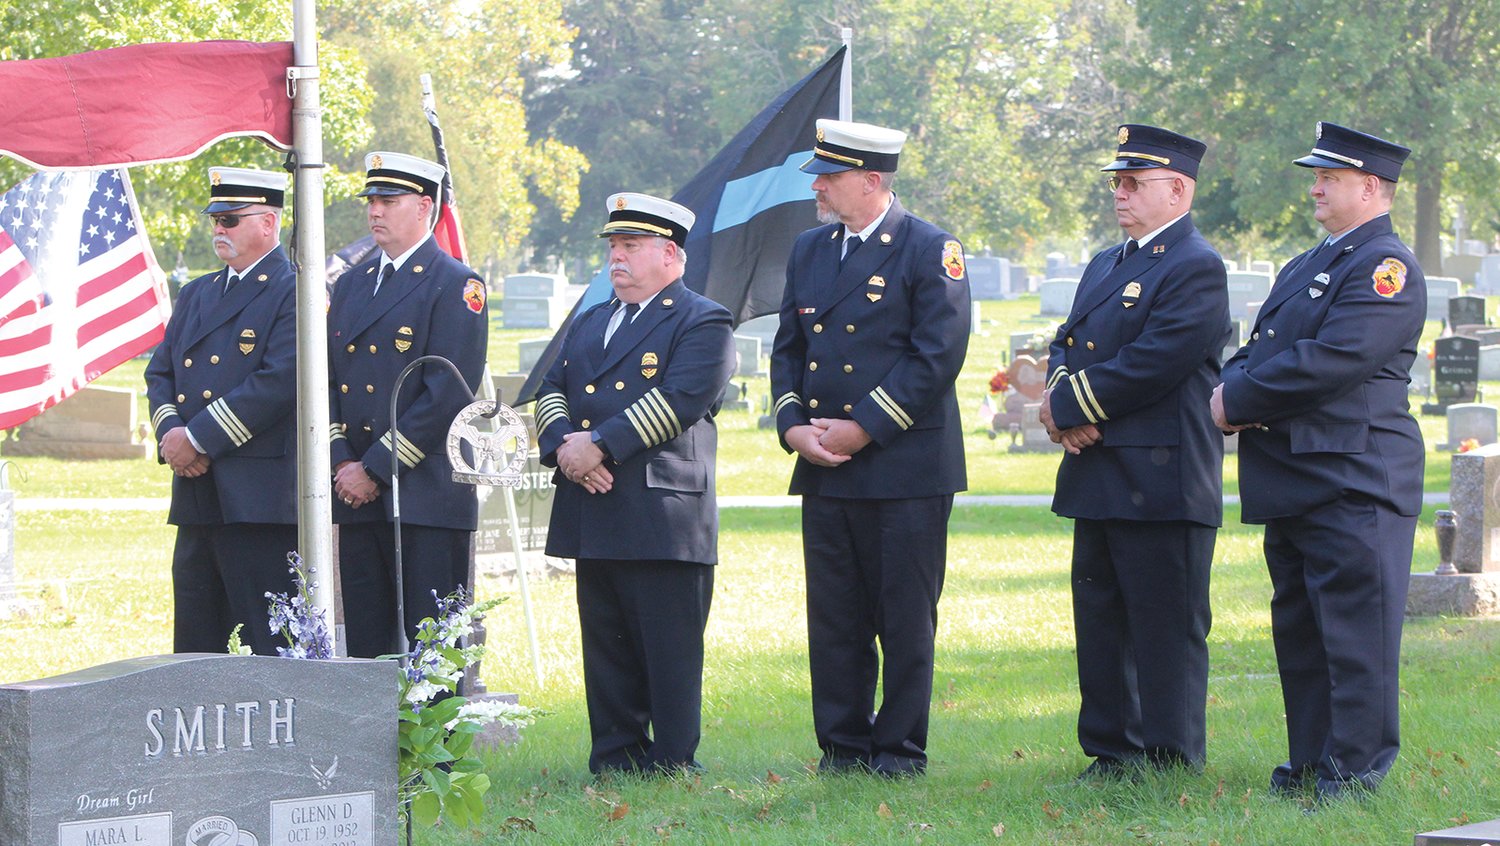 Crawfordsville firefighters served as pallbearers at the funeral for longtime fire chief Dennis Weir.